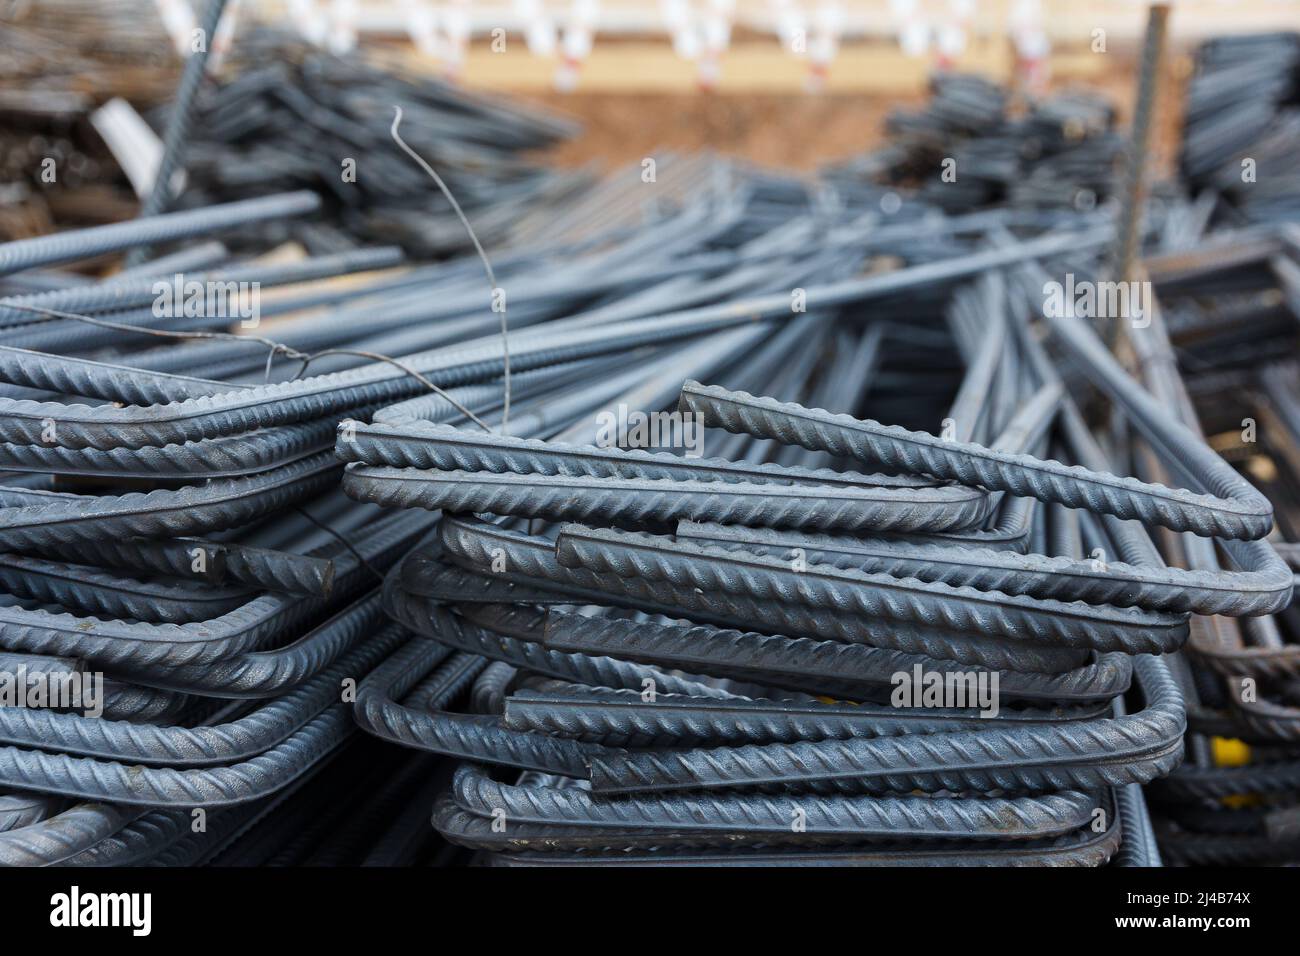 Reinforcement steel rod at construction site. Construction rebar steel work reinforcement. Rebar texture. Reinforcement steel rod. Rusty rebar for con Stock Photo